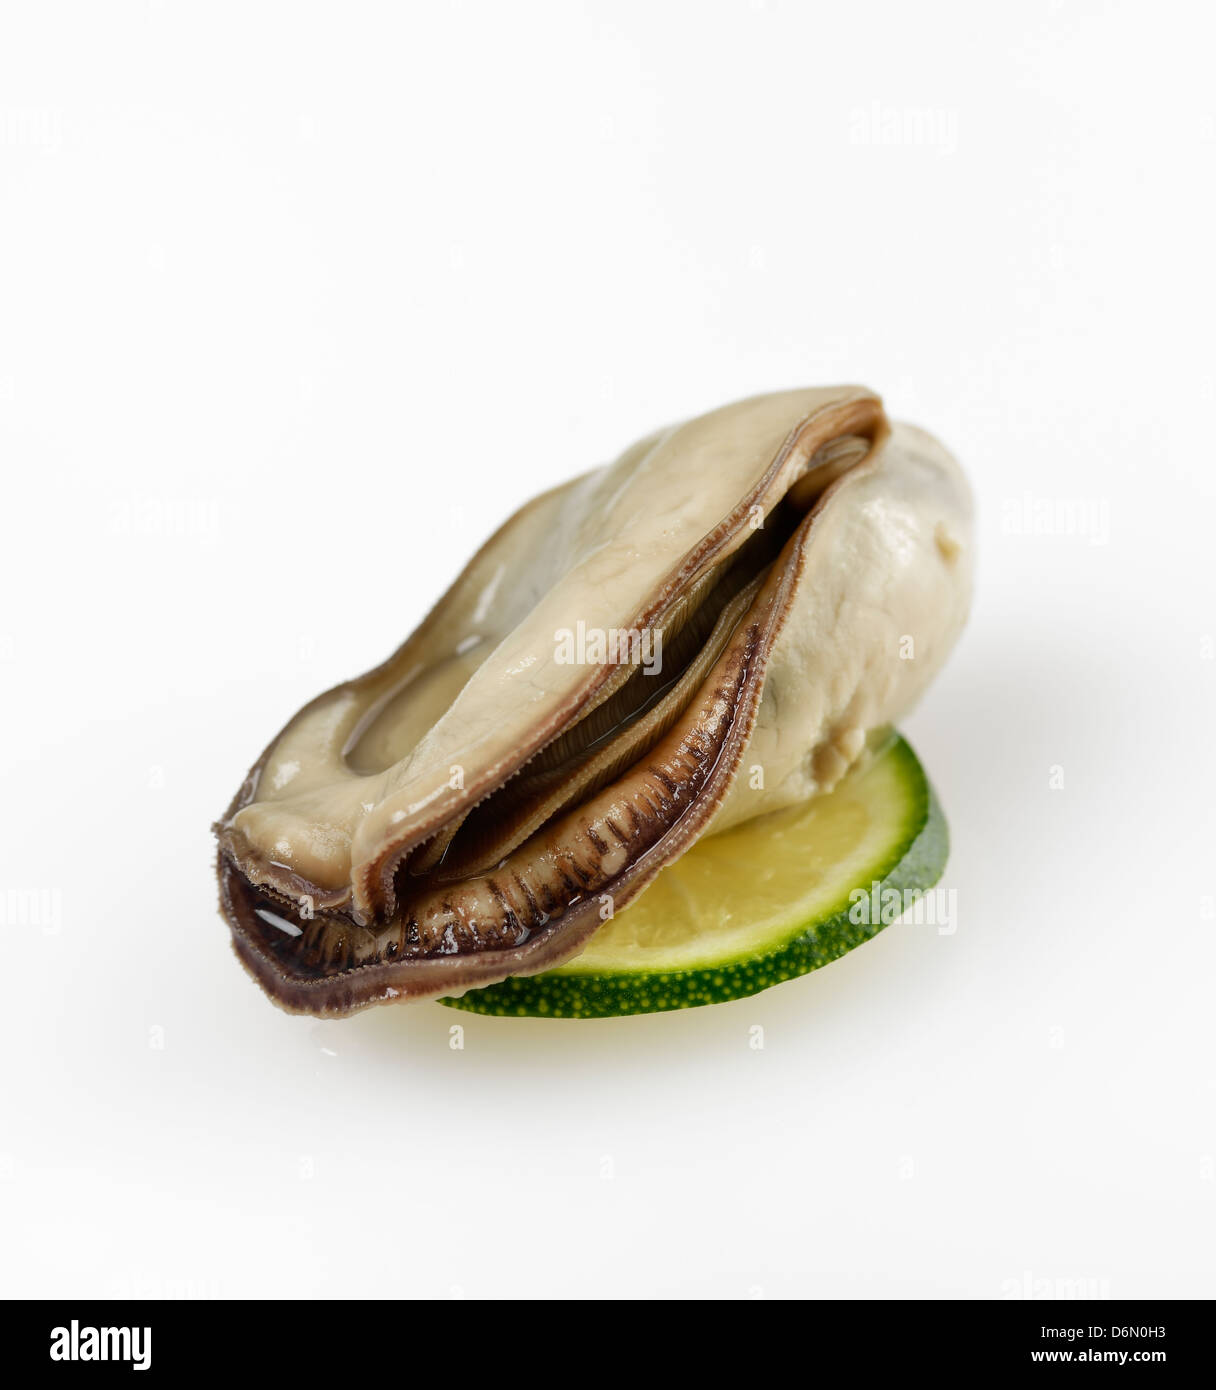 Oyster With Lemon On White Background Stock Photo